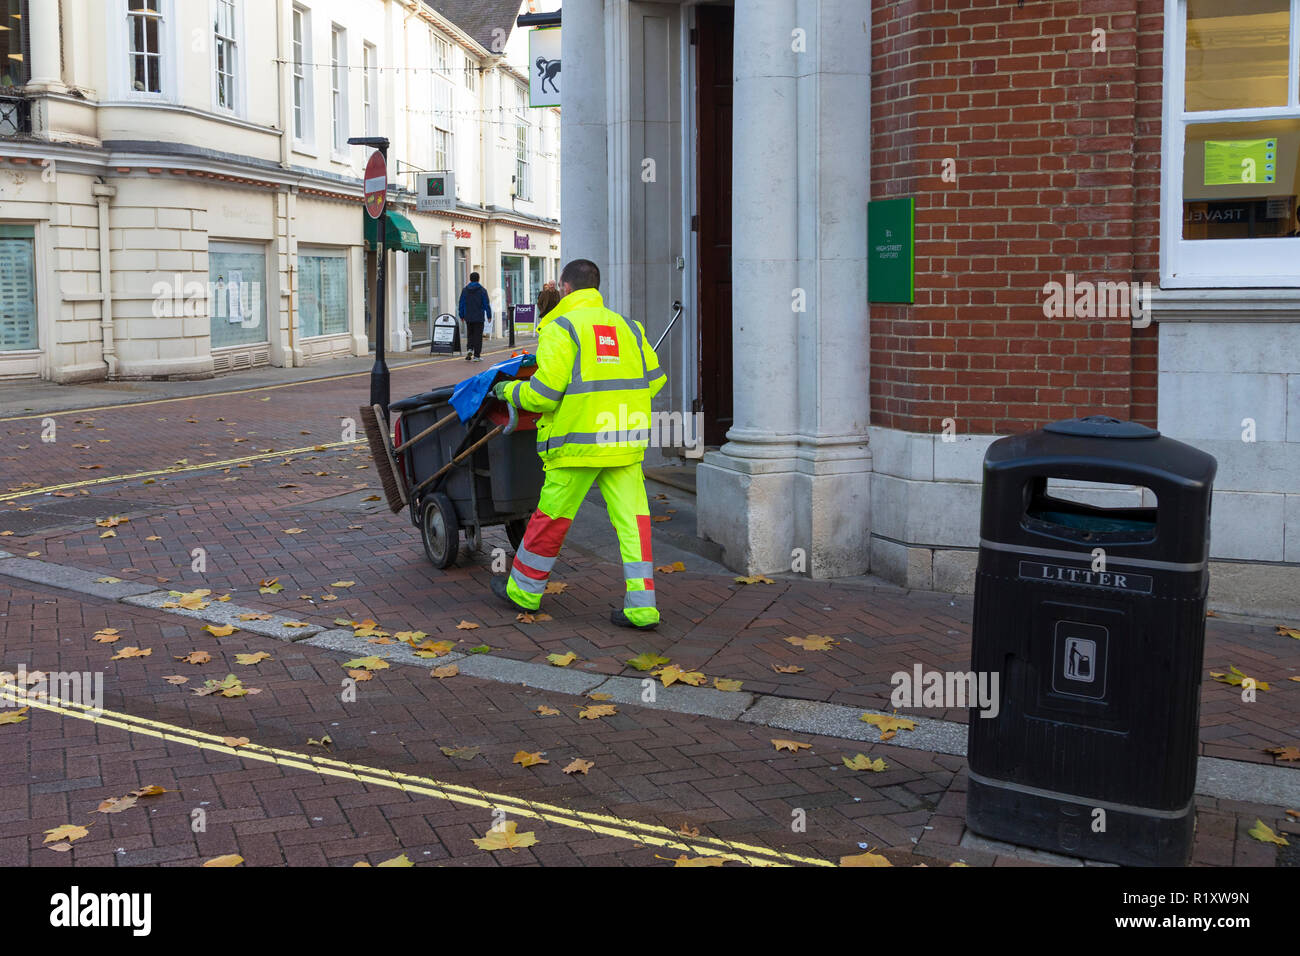 Rubbish and litter collection by a street cleaner council worker wearing hi vis jacket and biffa logo, ashford, town centre, kent, uk Stock Photo